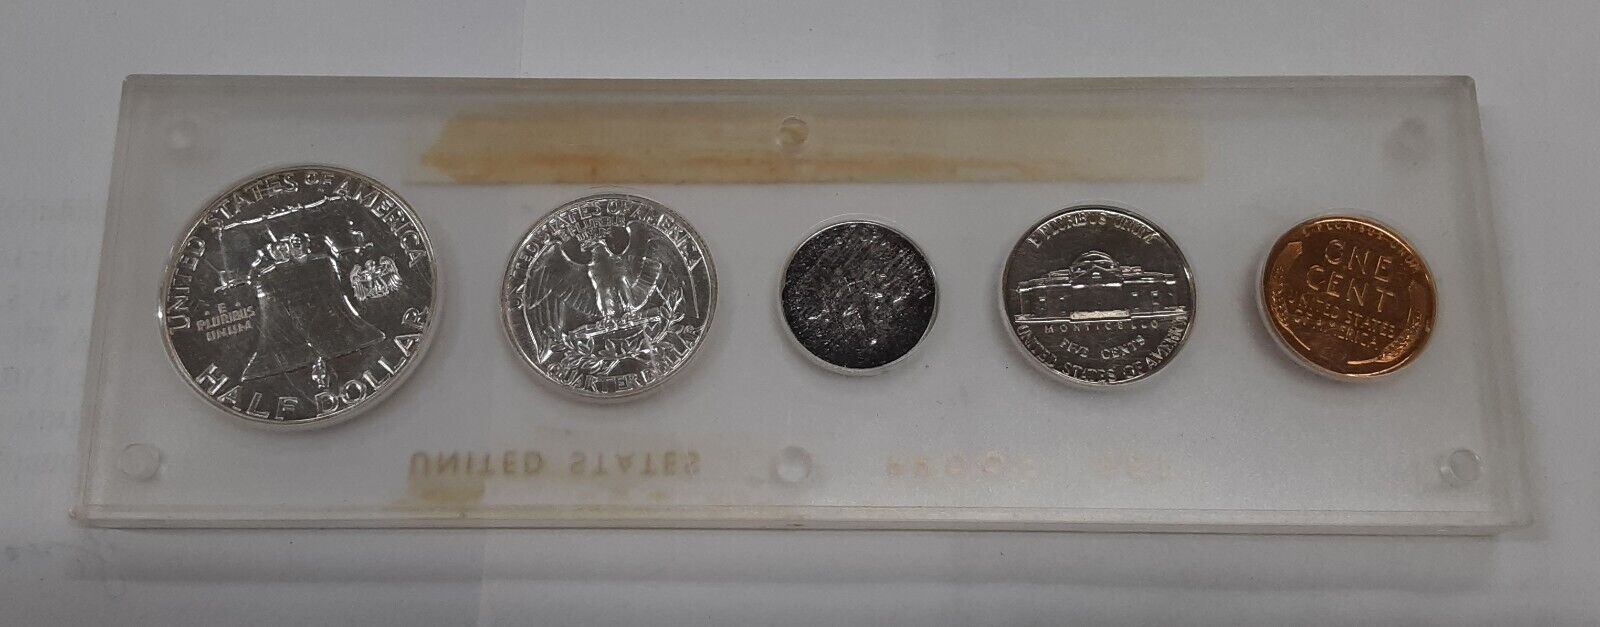 1957 US Silver Proof Set - 5 Proof Coins in Clear Plastic Holder  (A)